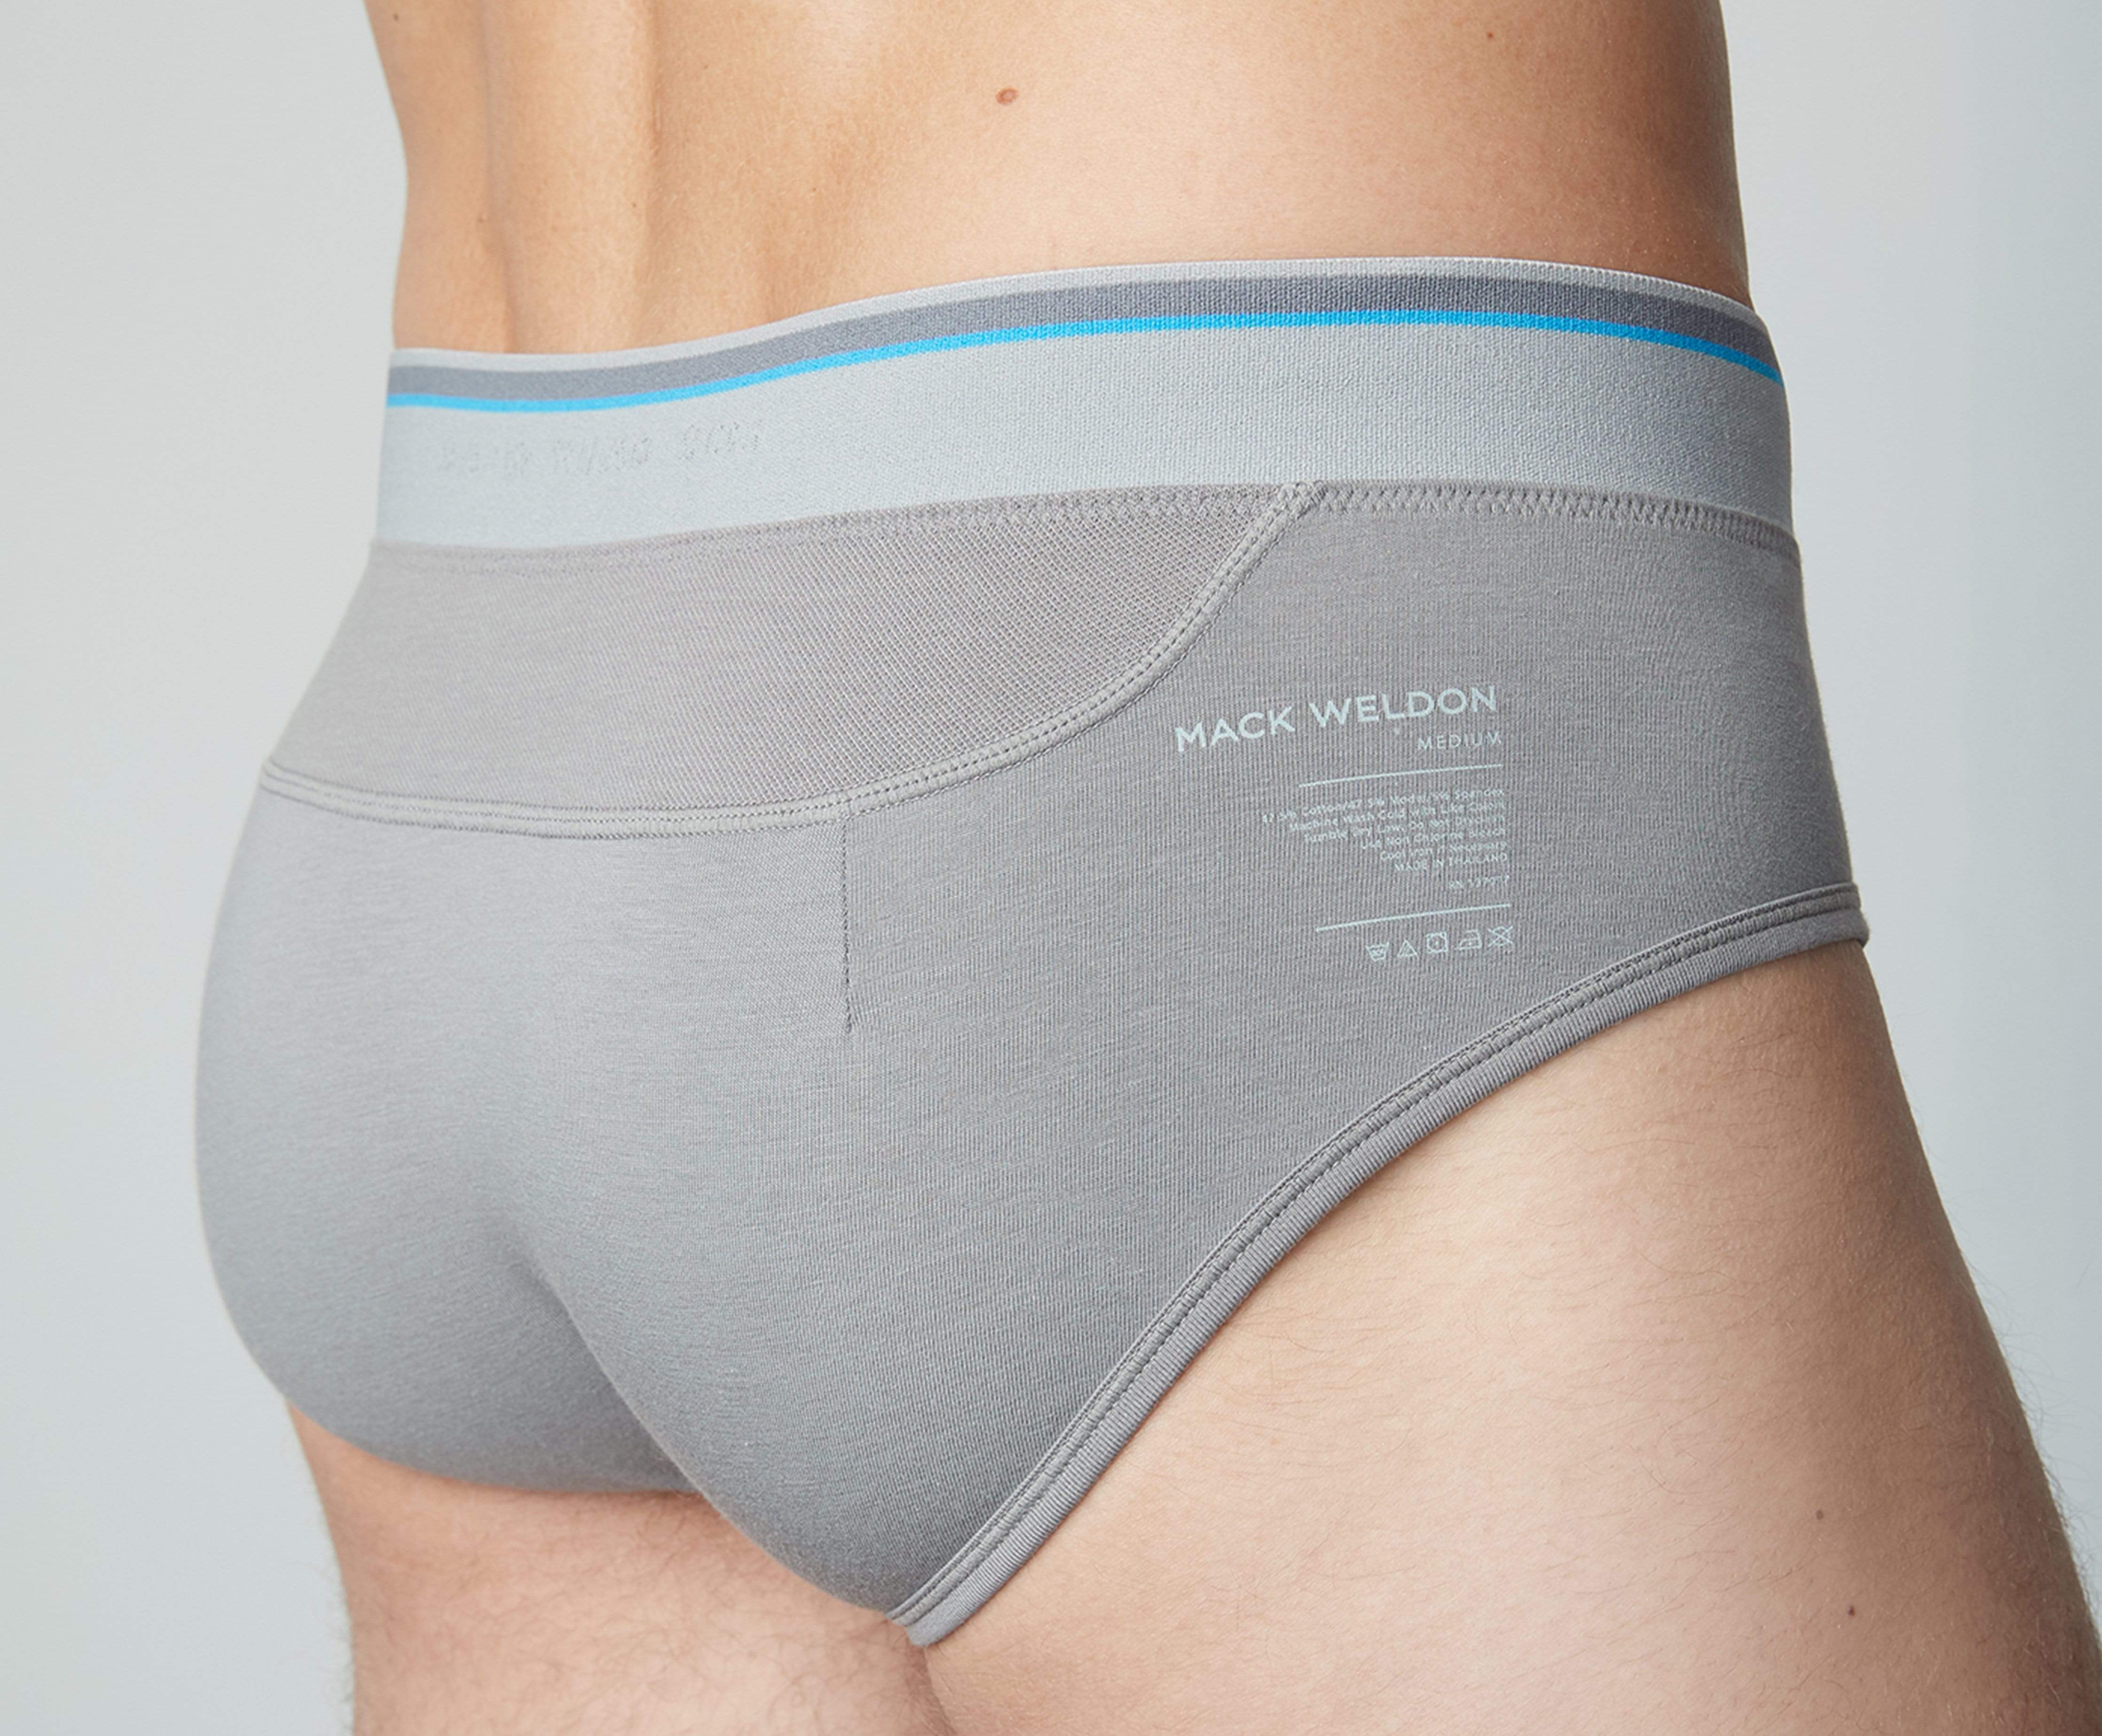 Mack Weldon - Beat the heat with our most breathable underwear